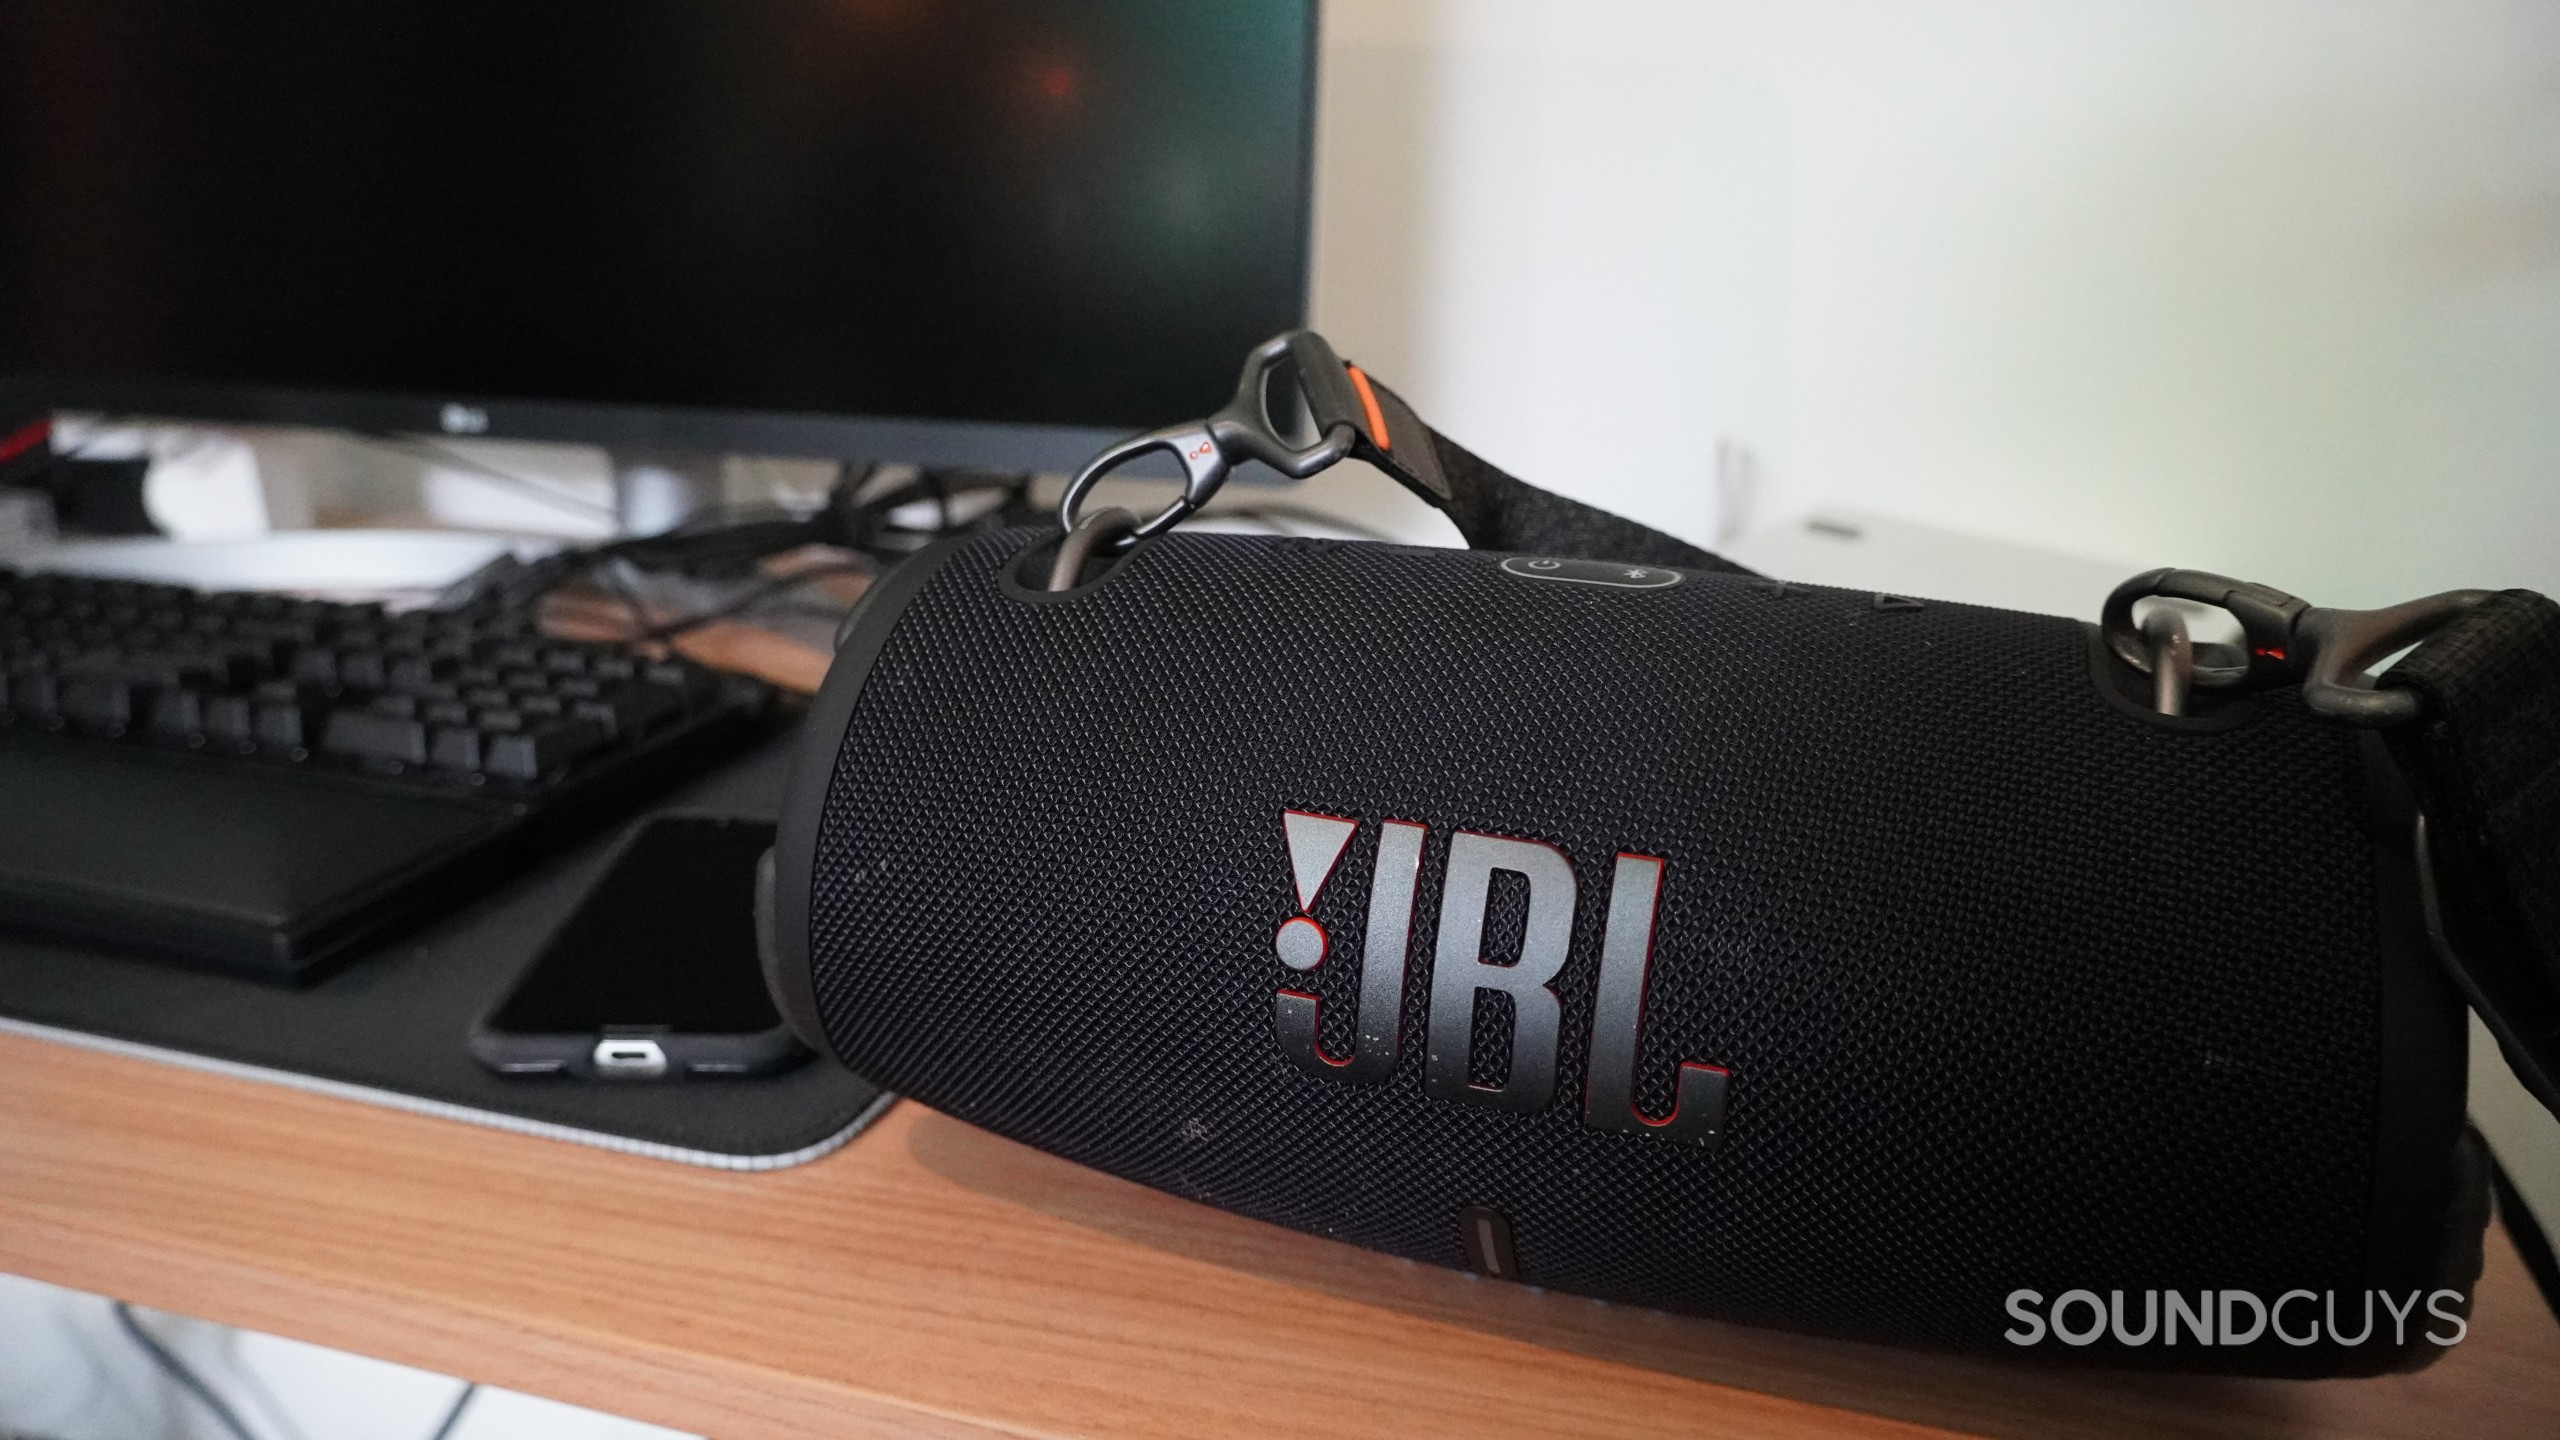 The JBL Xtreme 3 Bluetooth speaker sitting on a desk next to a phone, keyboard, and computer monitor.